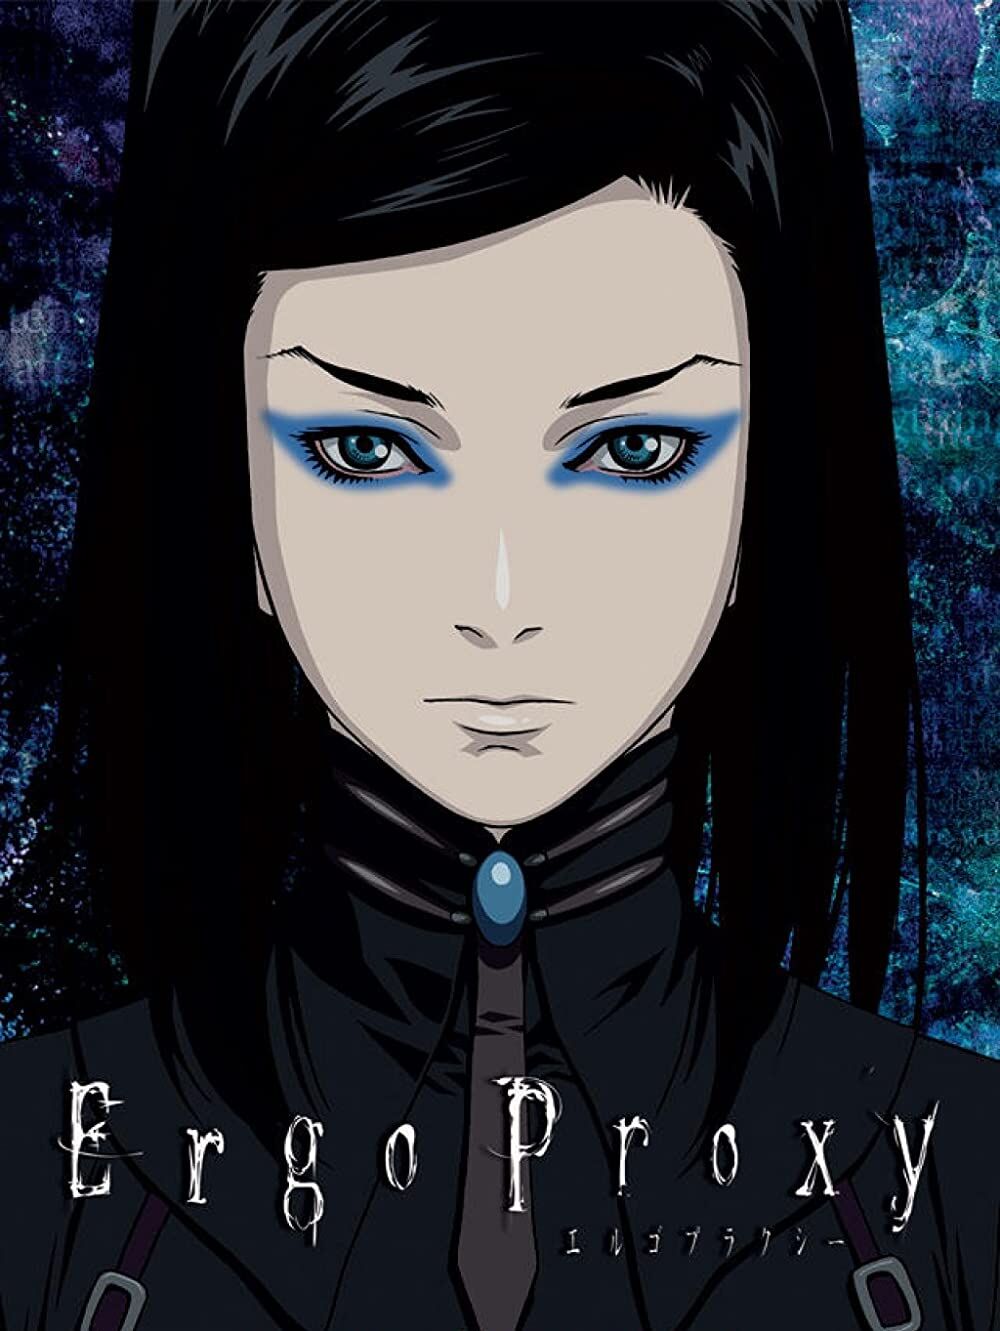 the cool characters of ergo proxy by TheCheekyChipmunk on Newgrounds